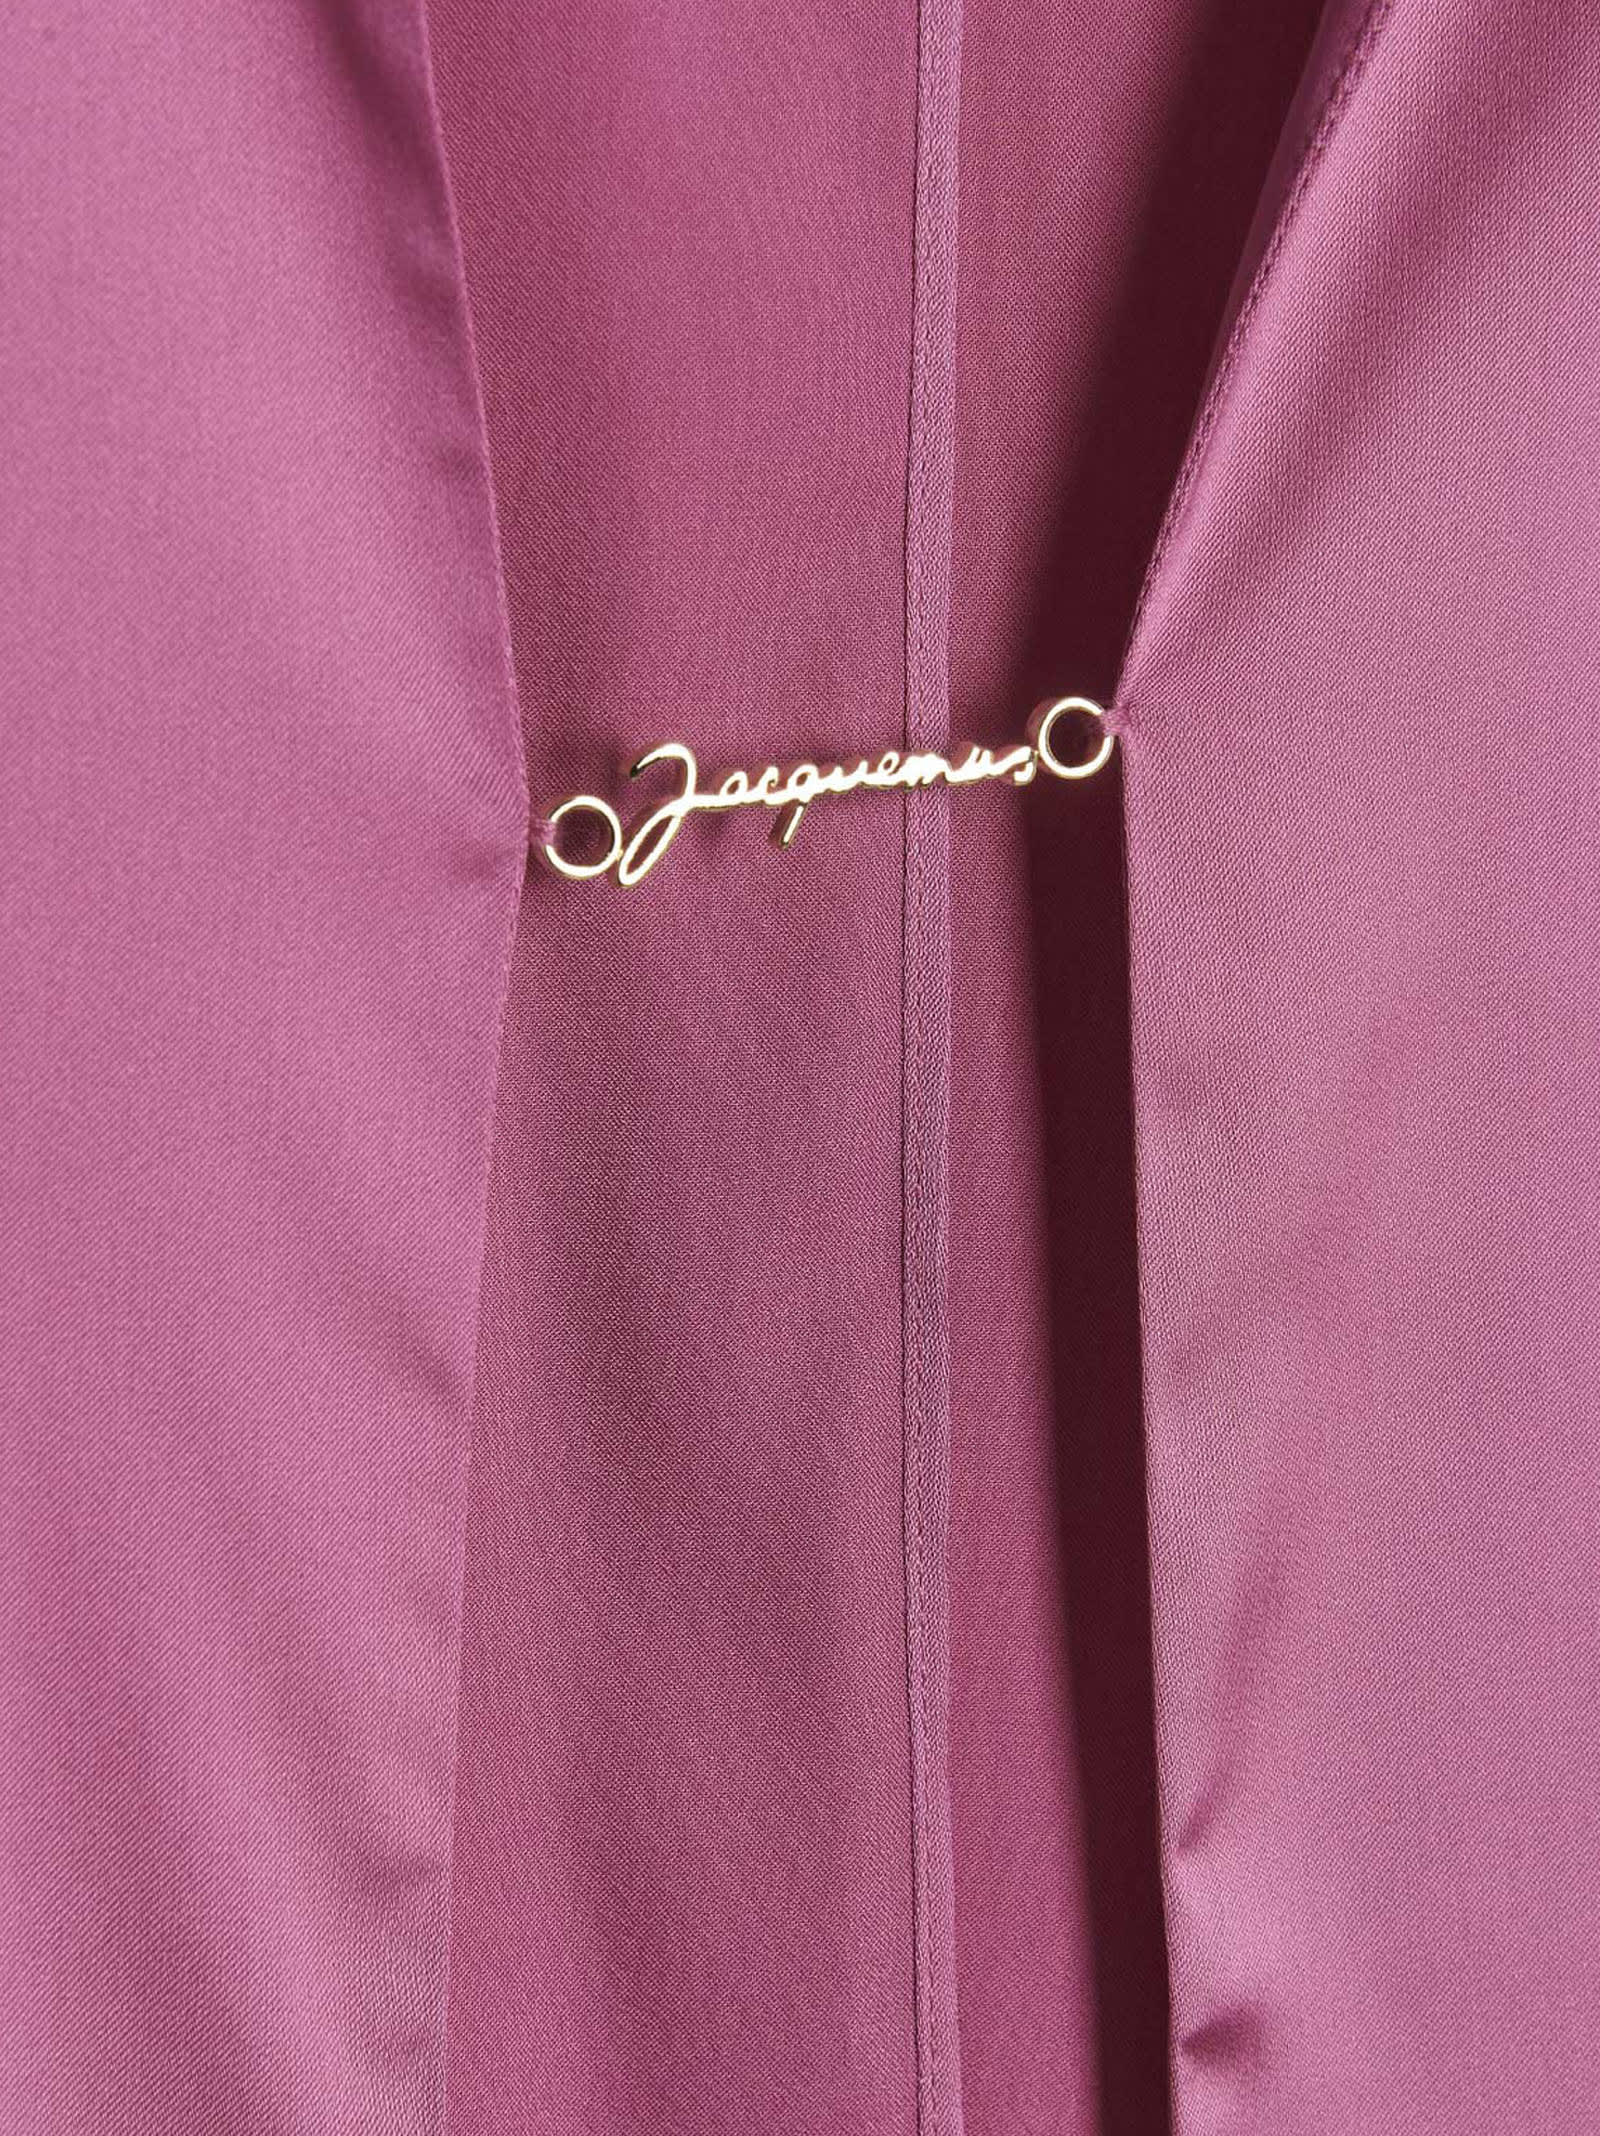 Shop Jacquemus Notte Shirt In Pink